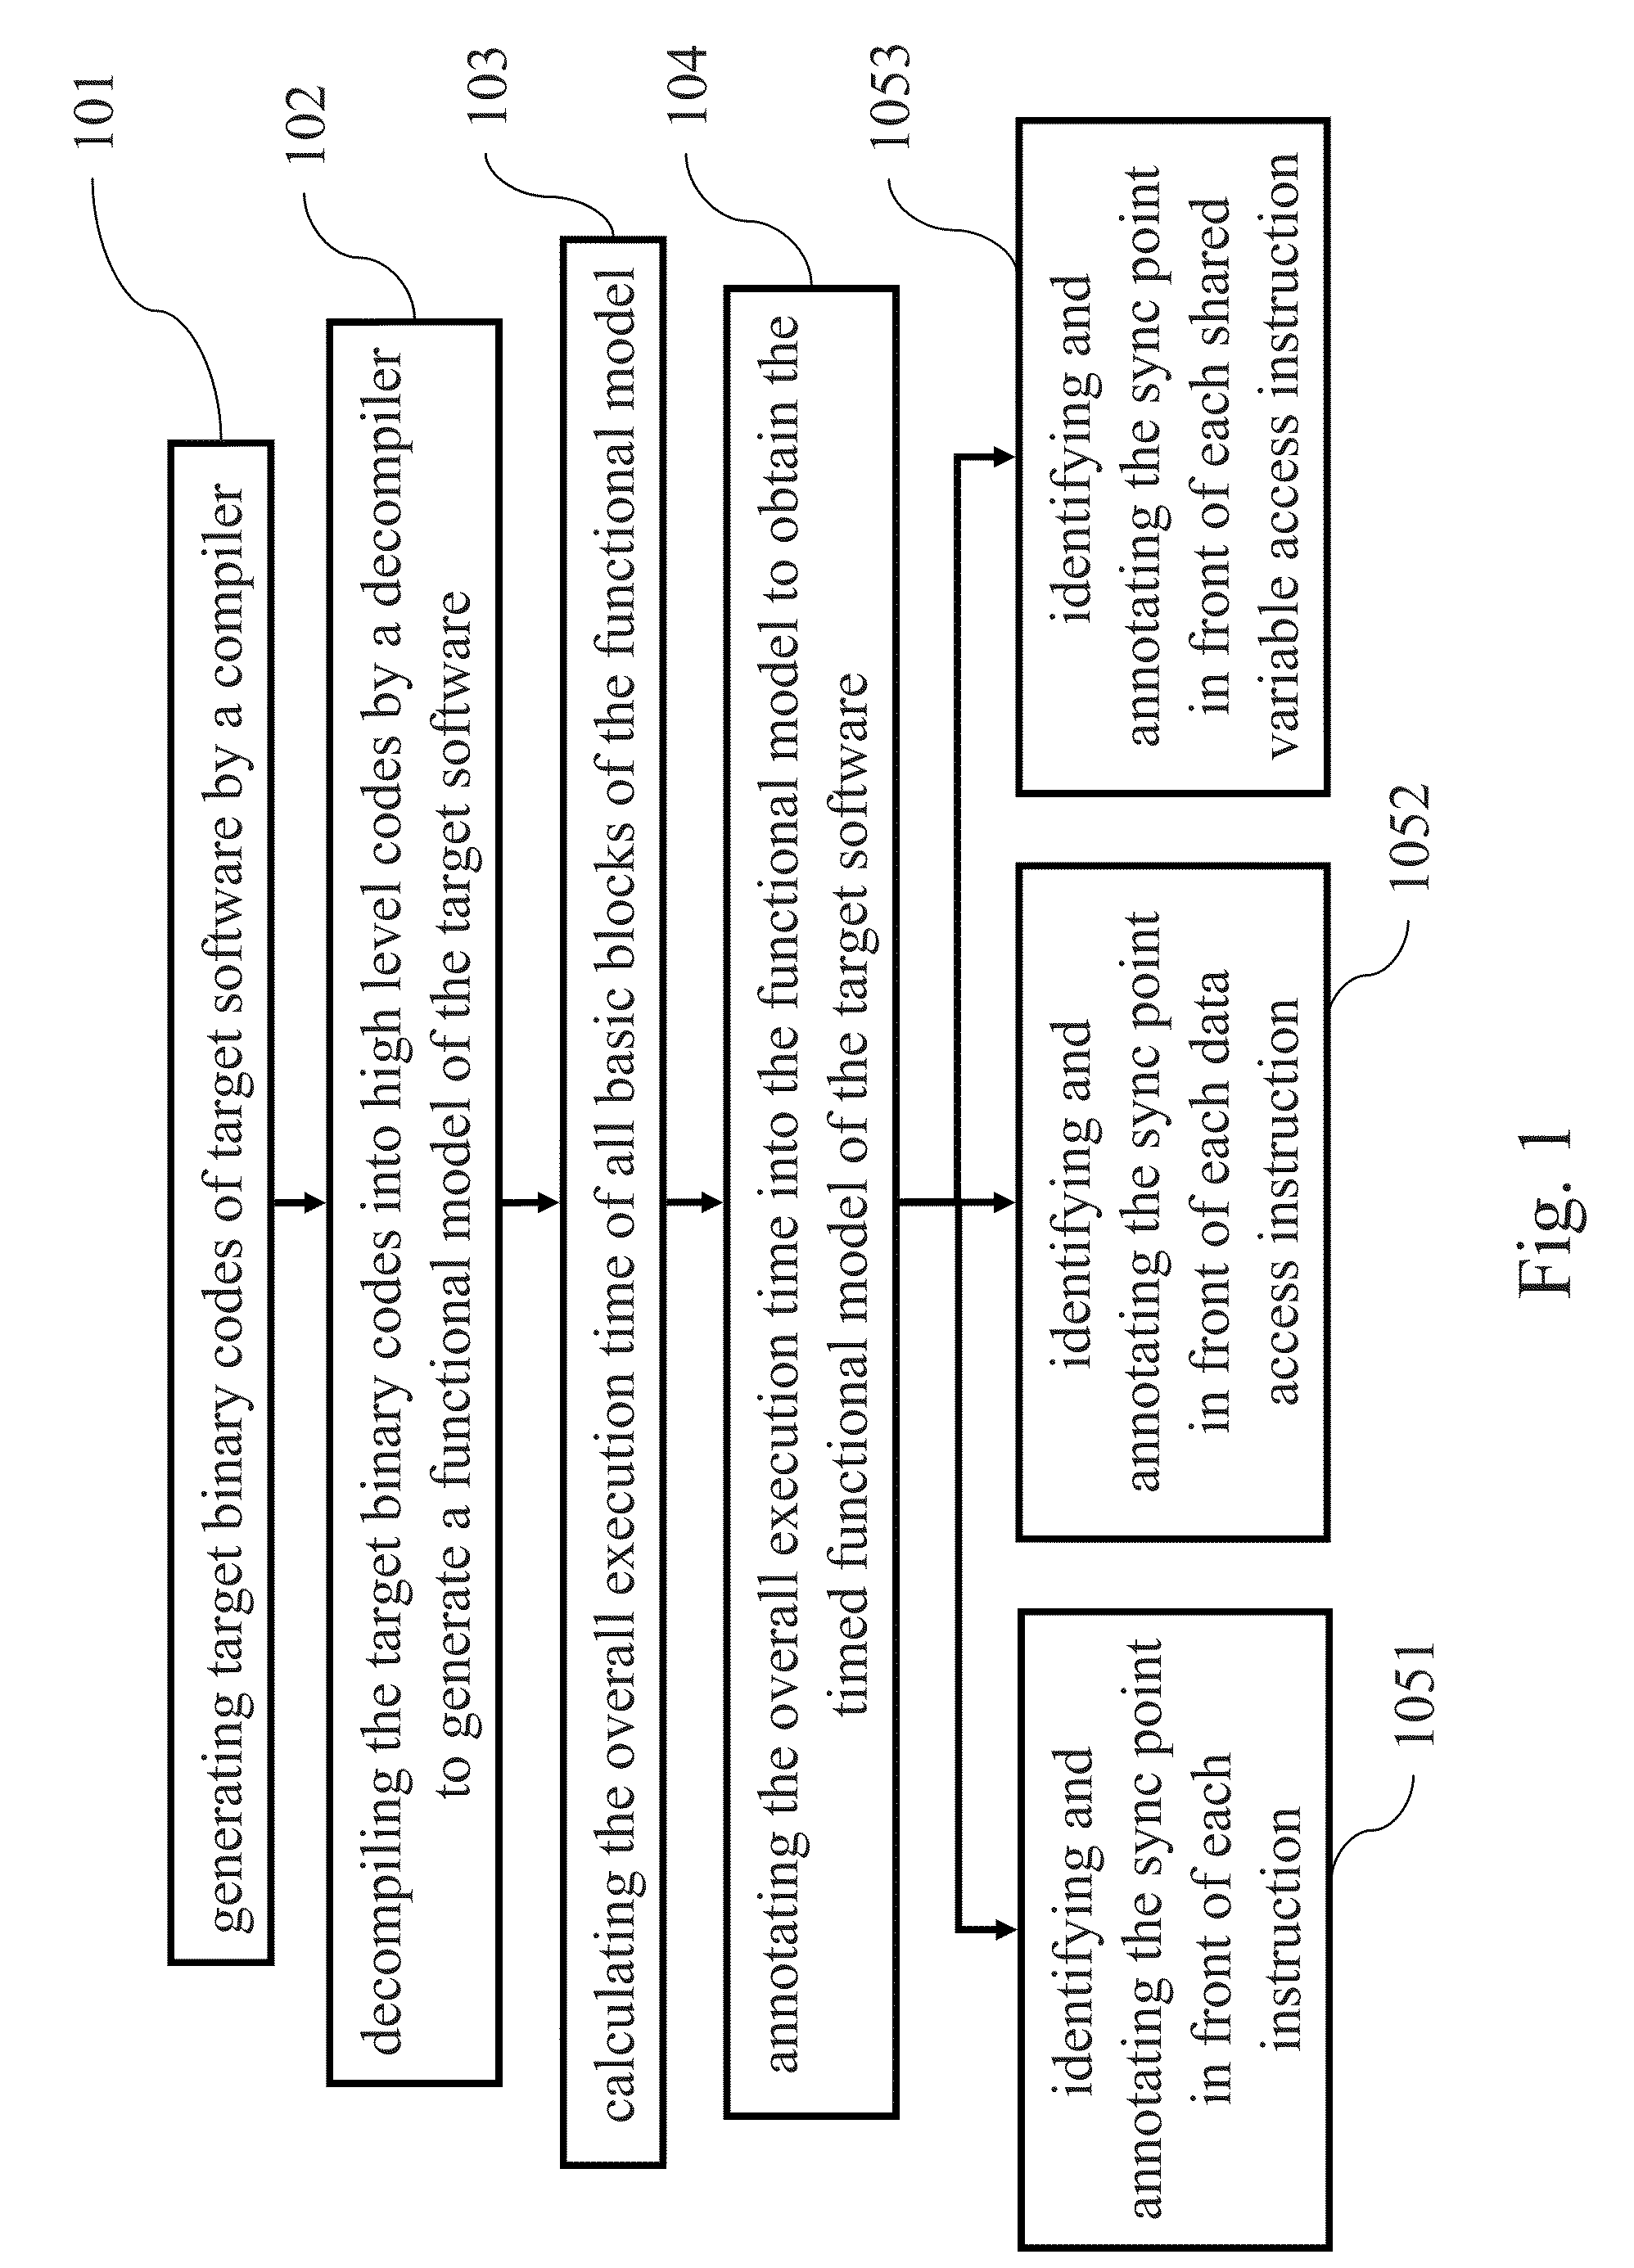 Method, System and Computer Readable Medium for Generating Software Transaction-Level Modeling (TLM) Model